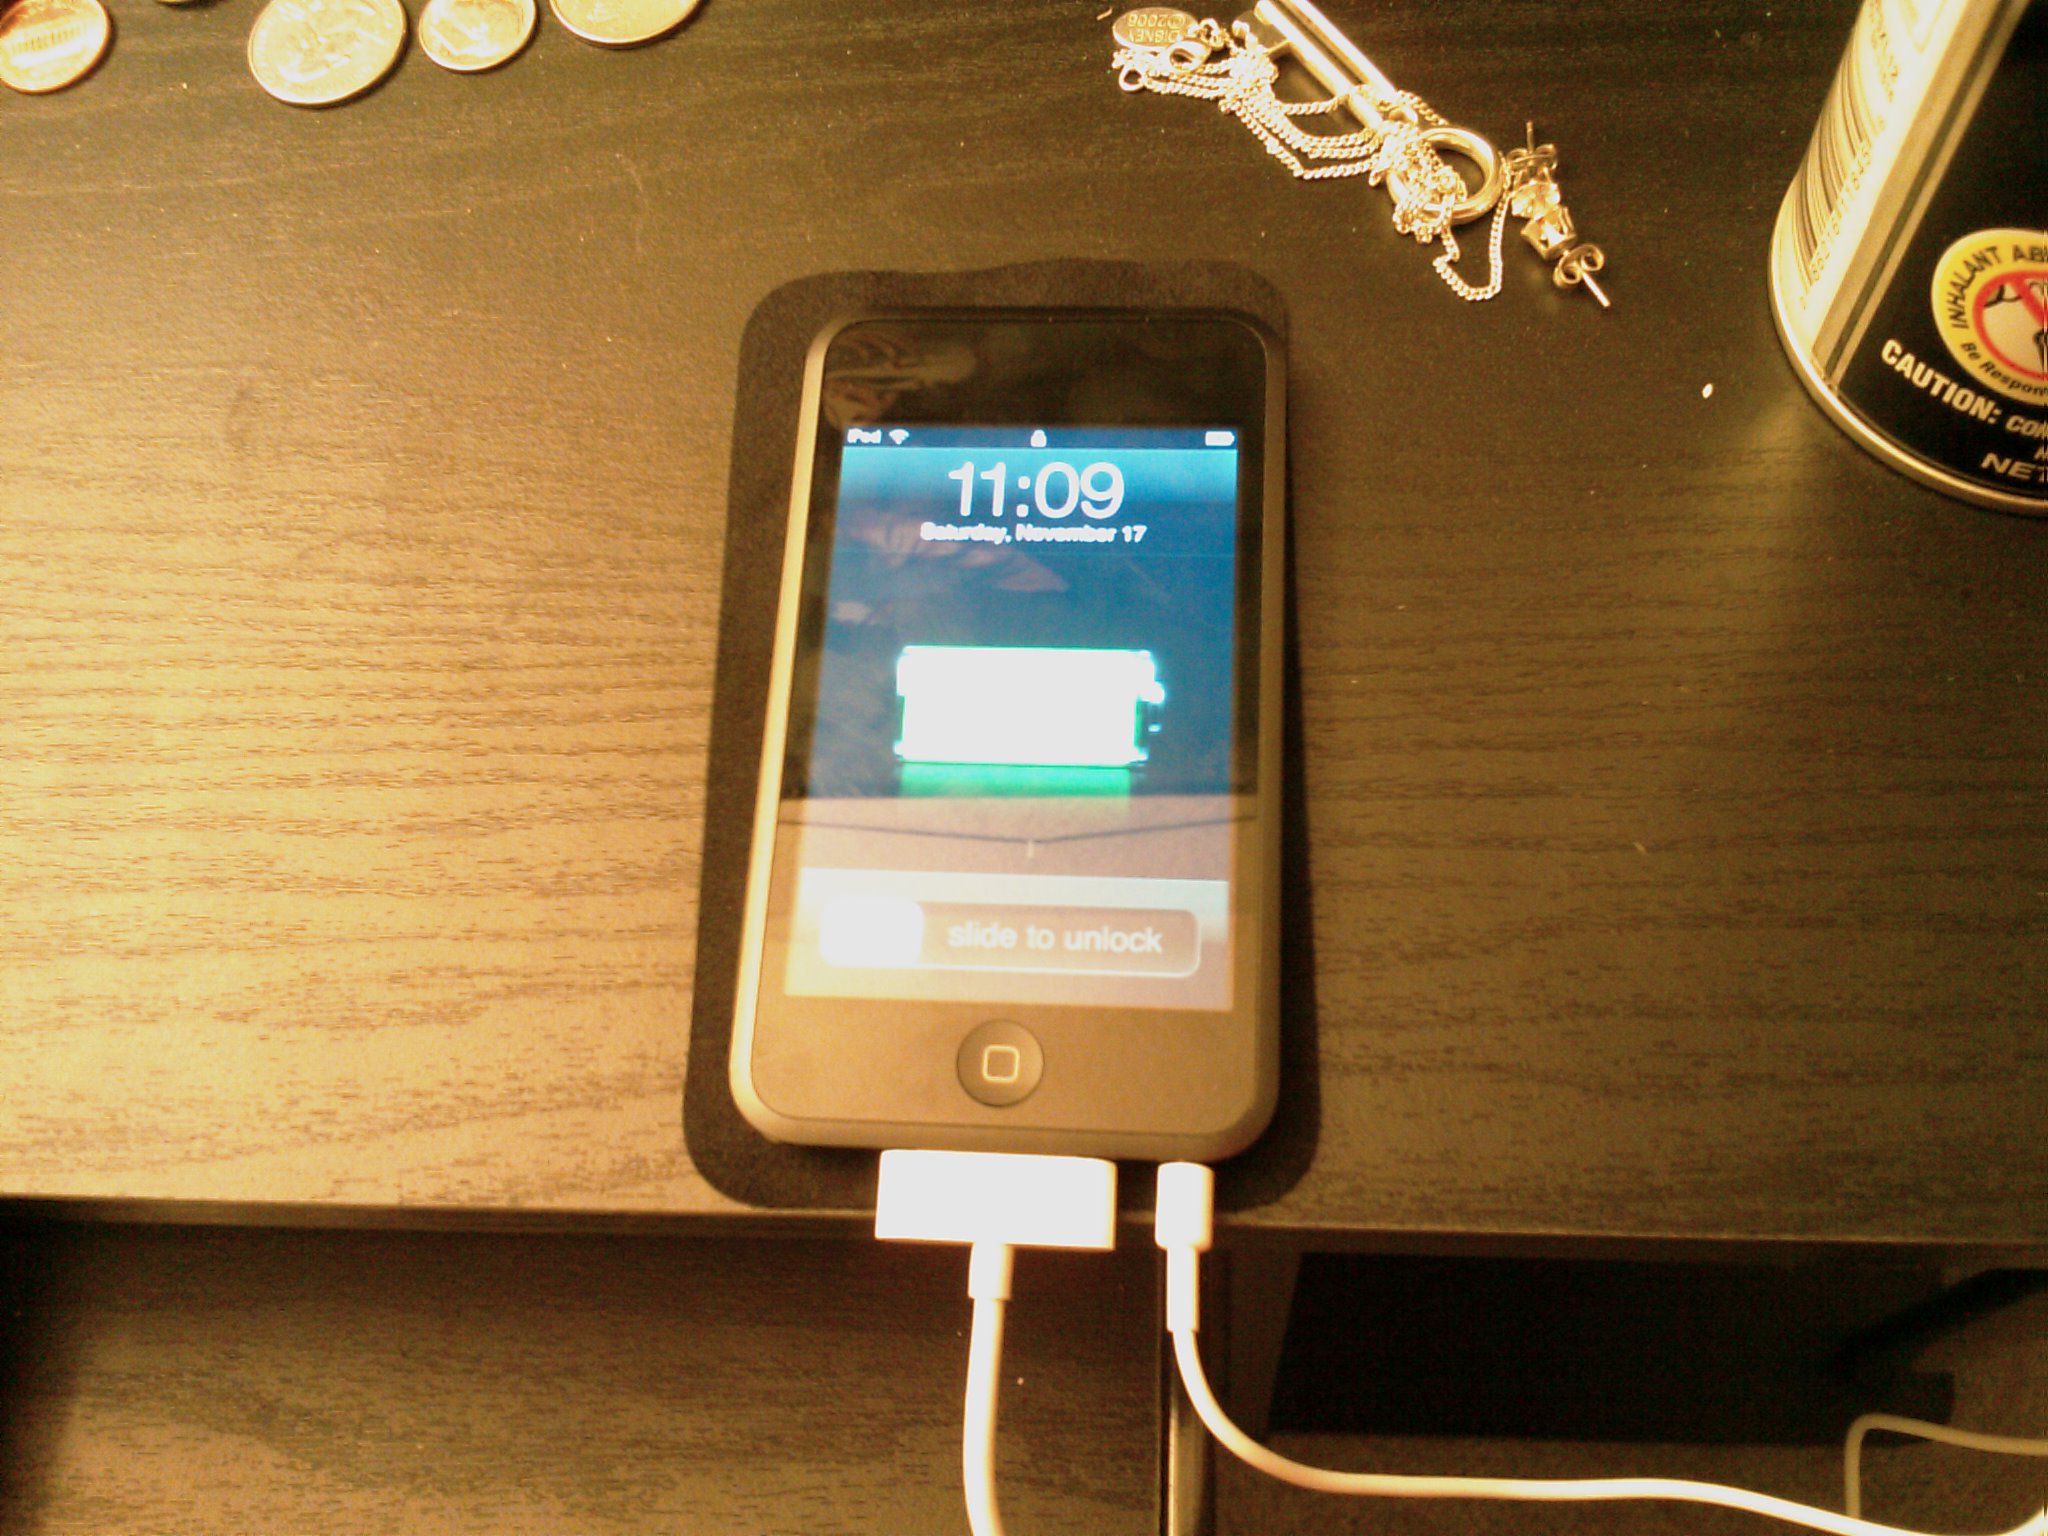 iTouch